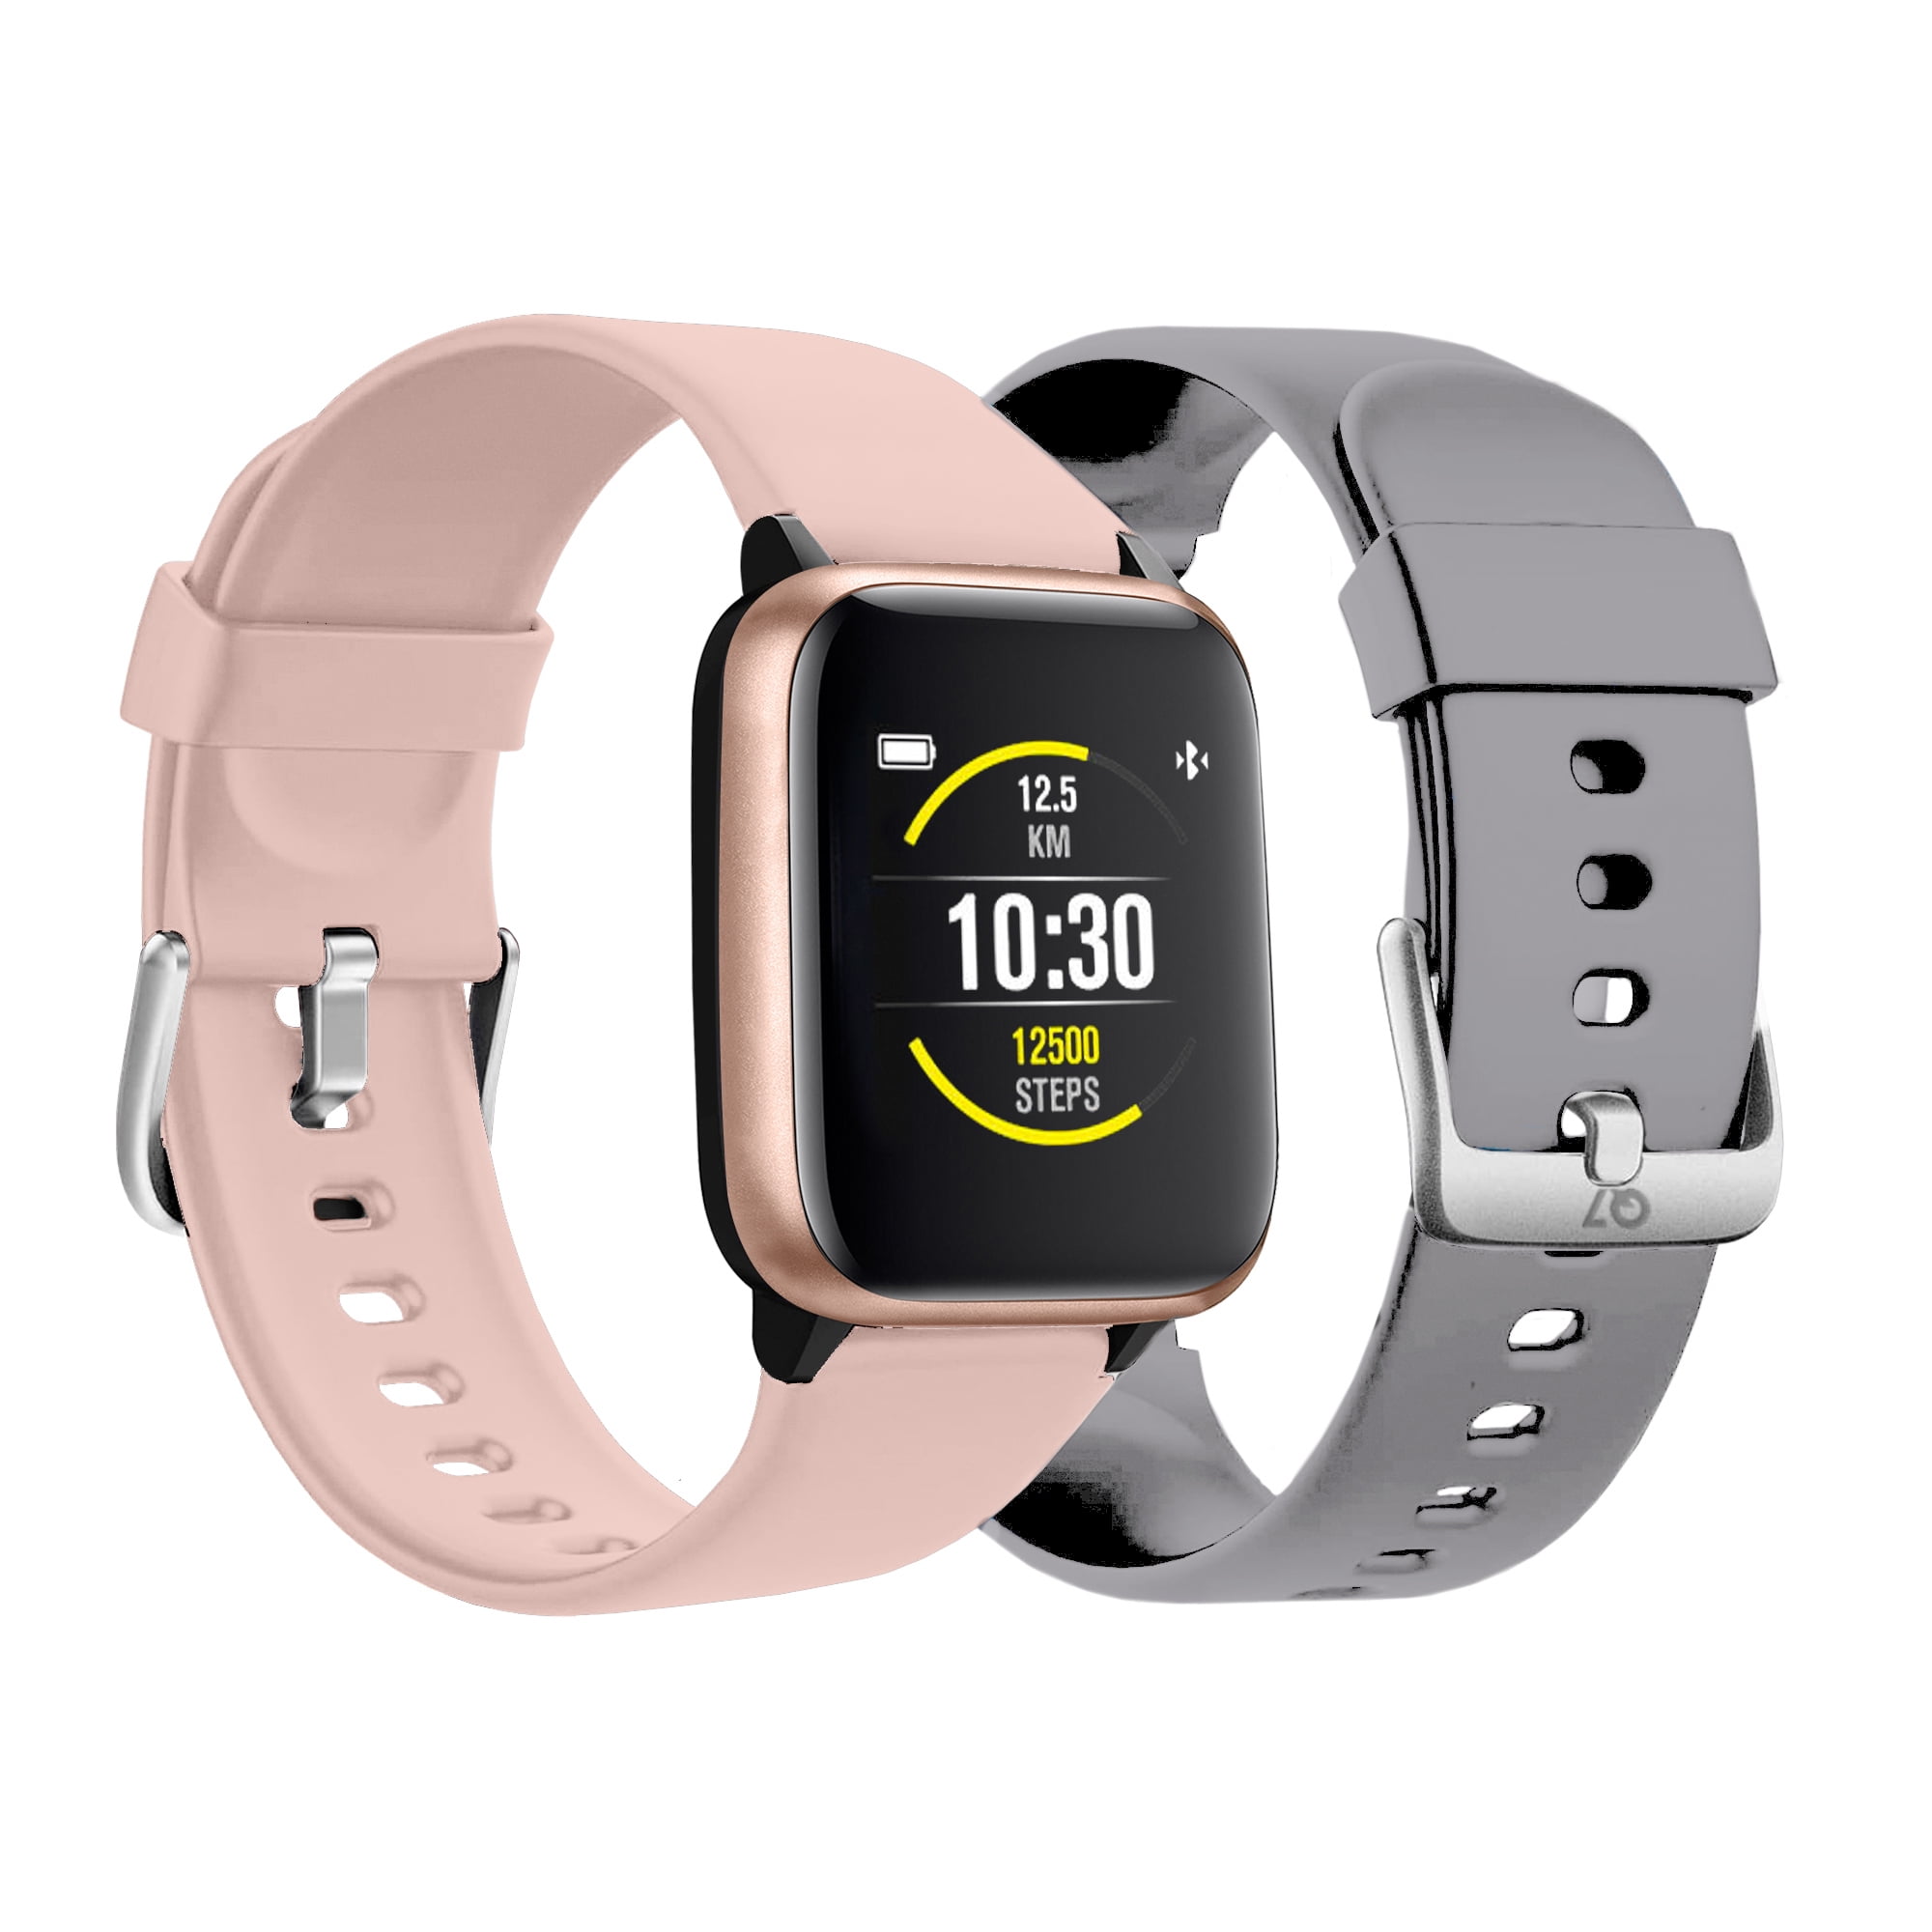 Aislar título Rápido Q7 Smartwatch Fitness Tracker with Interchangeable Straps Compatible w iOS  & Android (Blush/Grey) - Walmart.com